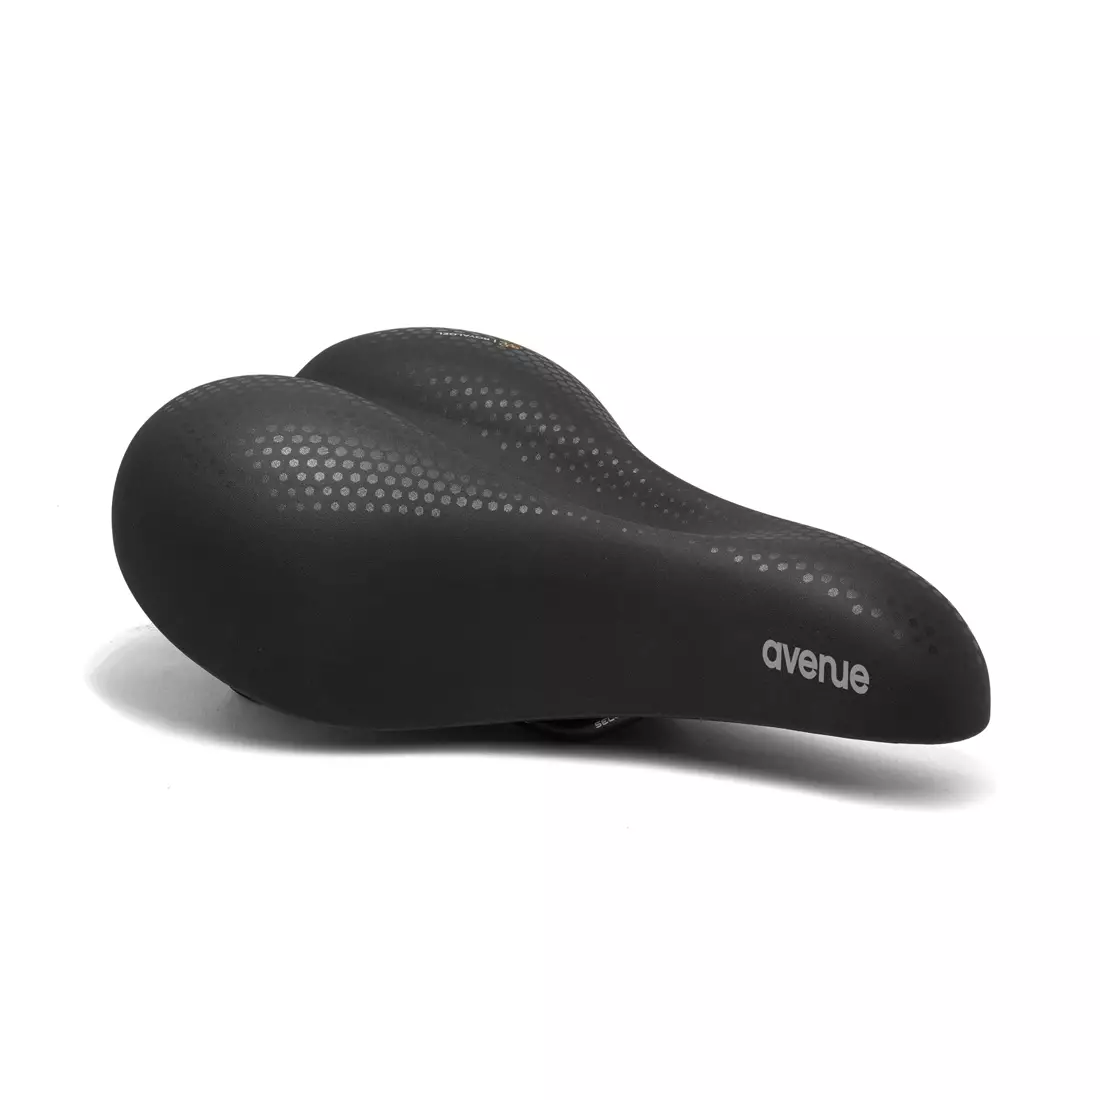 SELLEROYAL CLASSIC MODERATE AVENUE 60st Women's bicycle seat, black